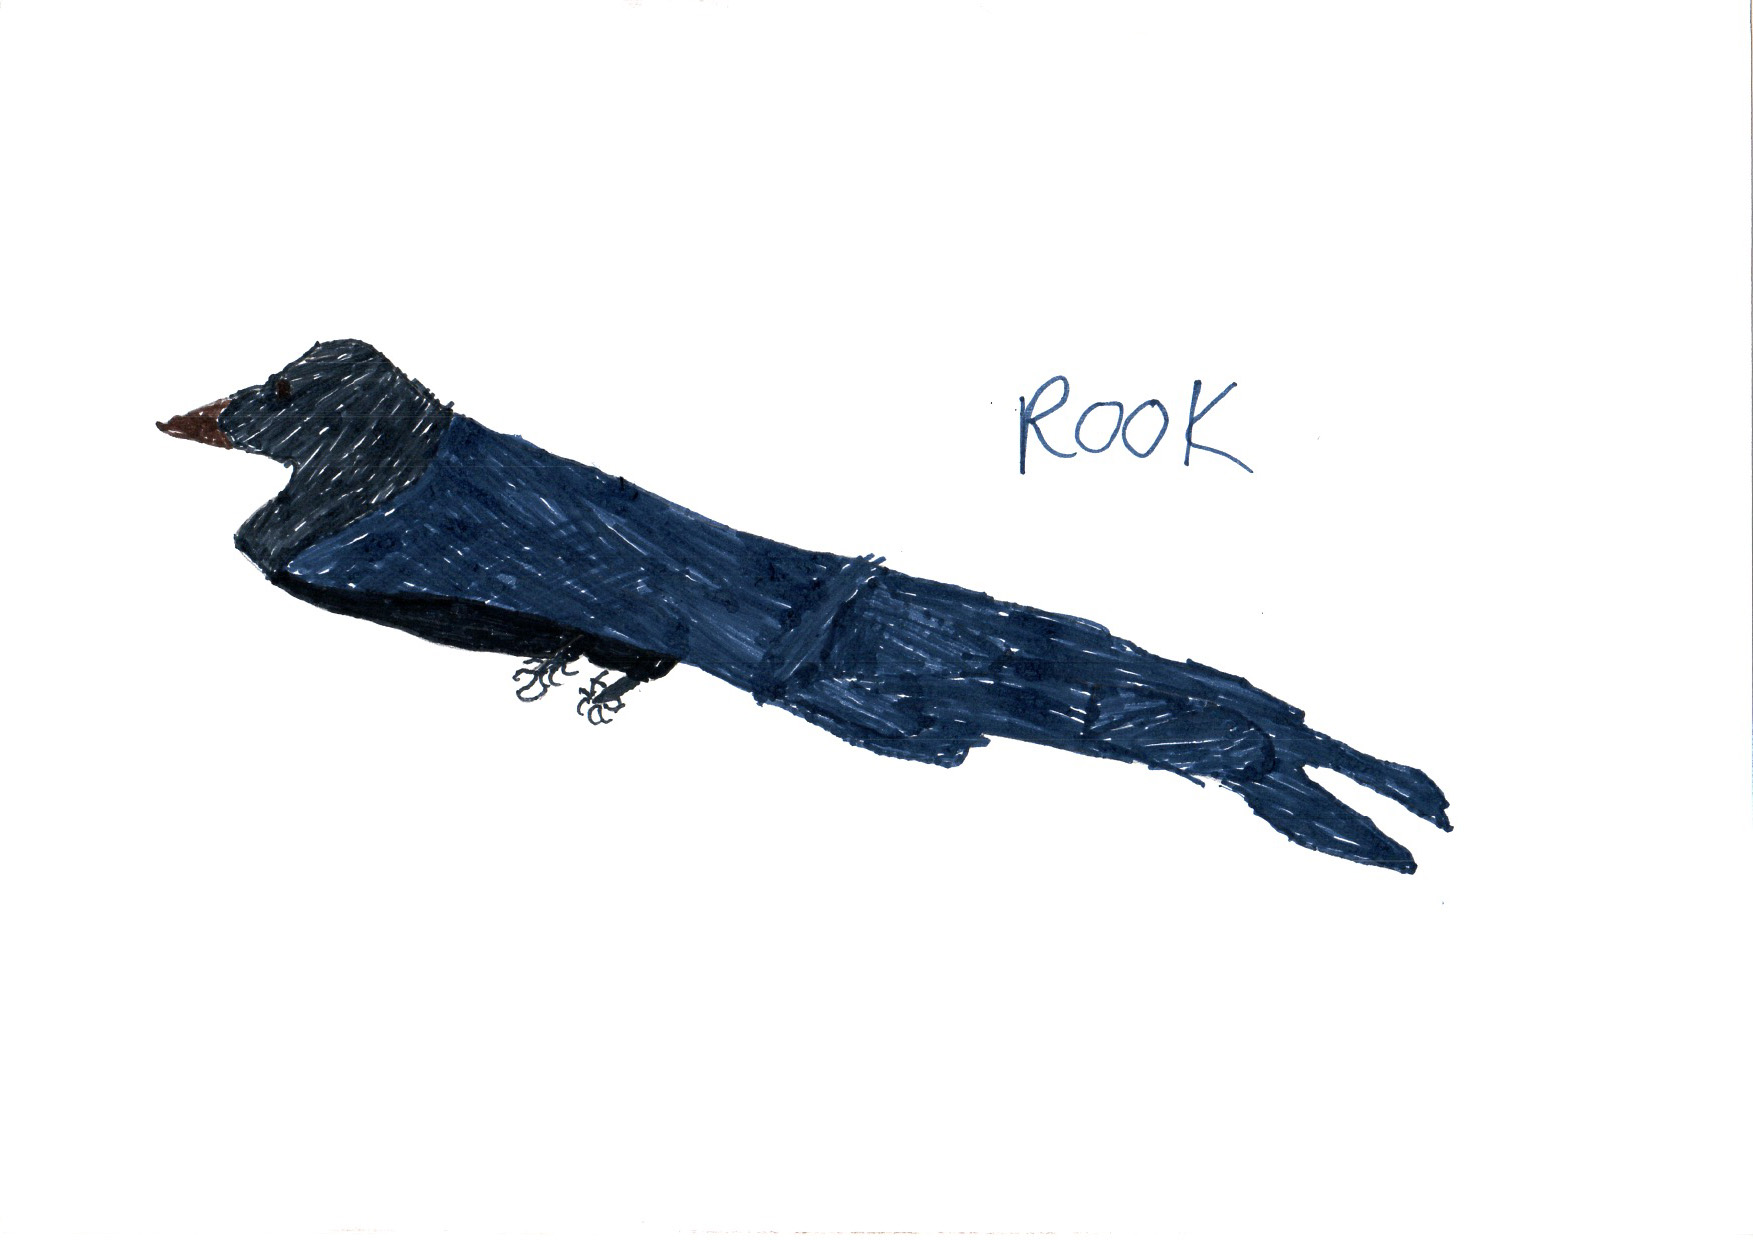 Above: "Rook" by Jude Stout (Yr 3, Arbory School)